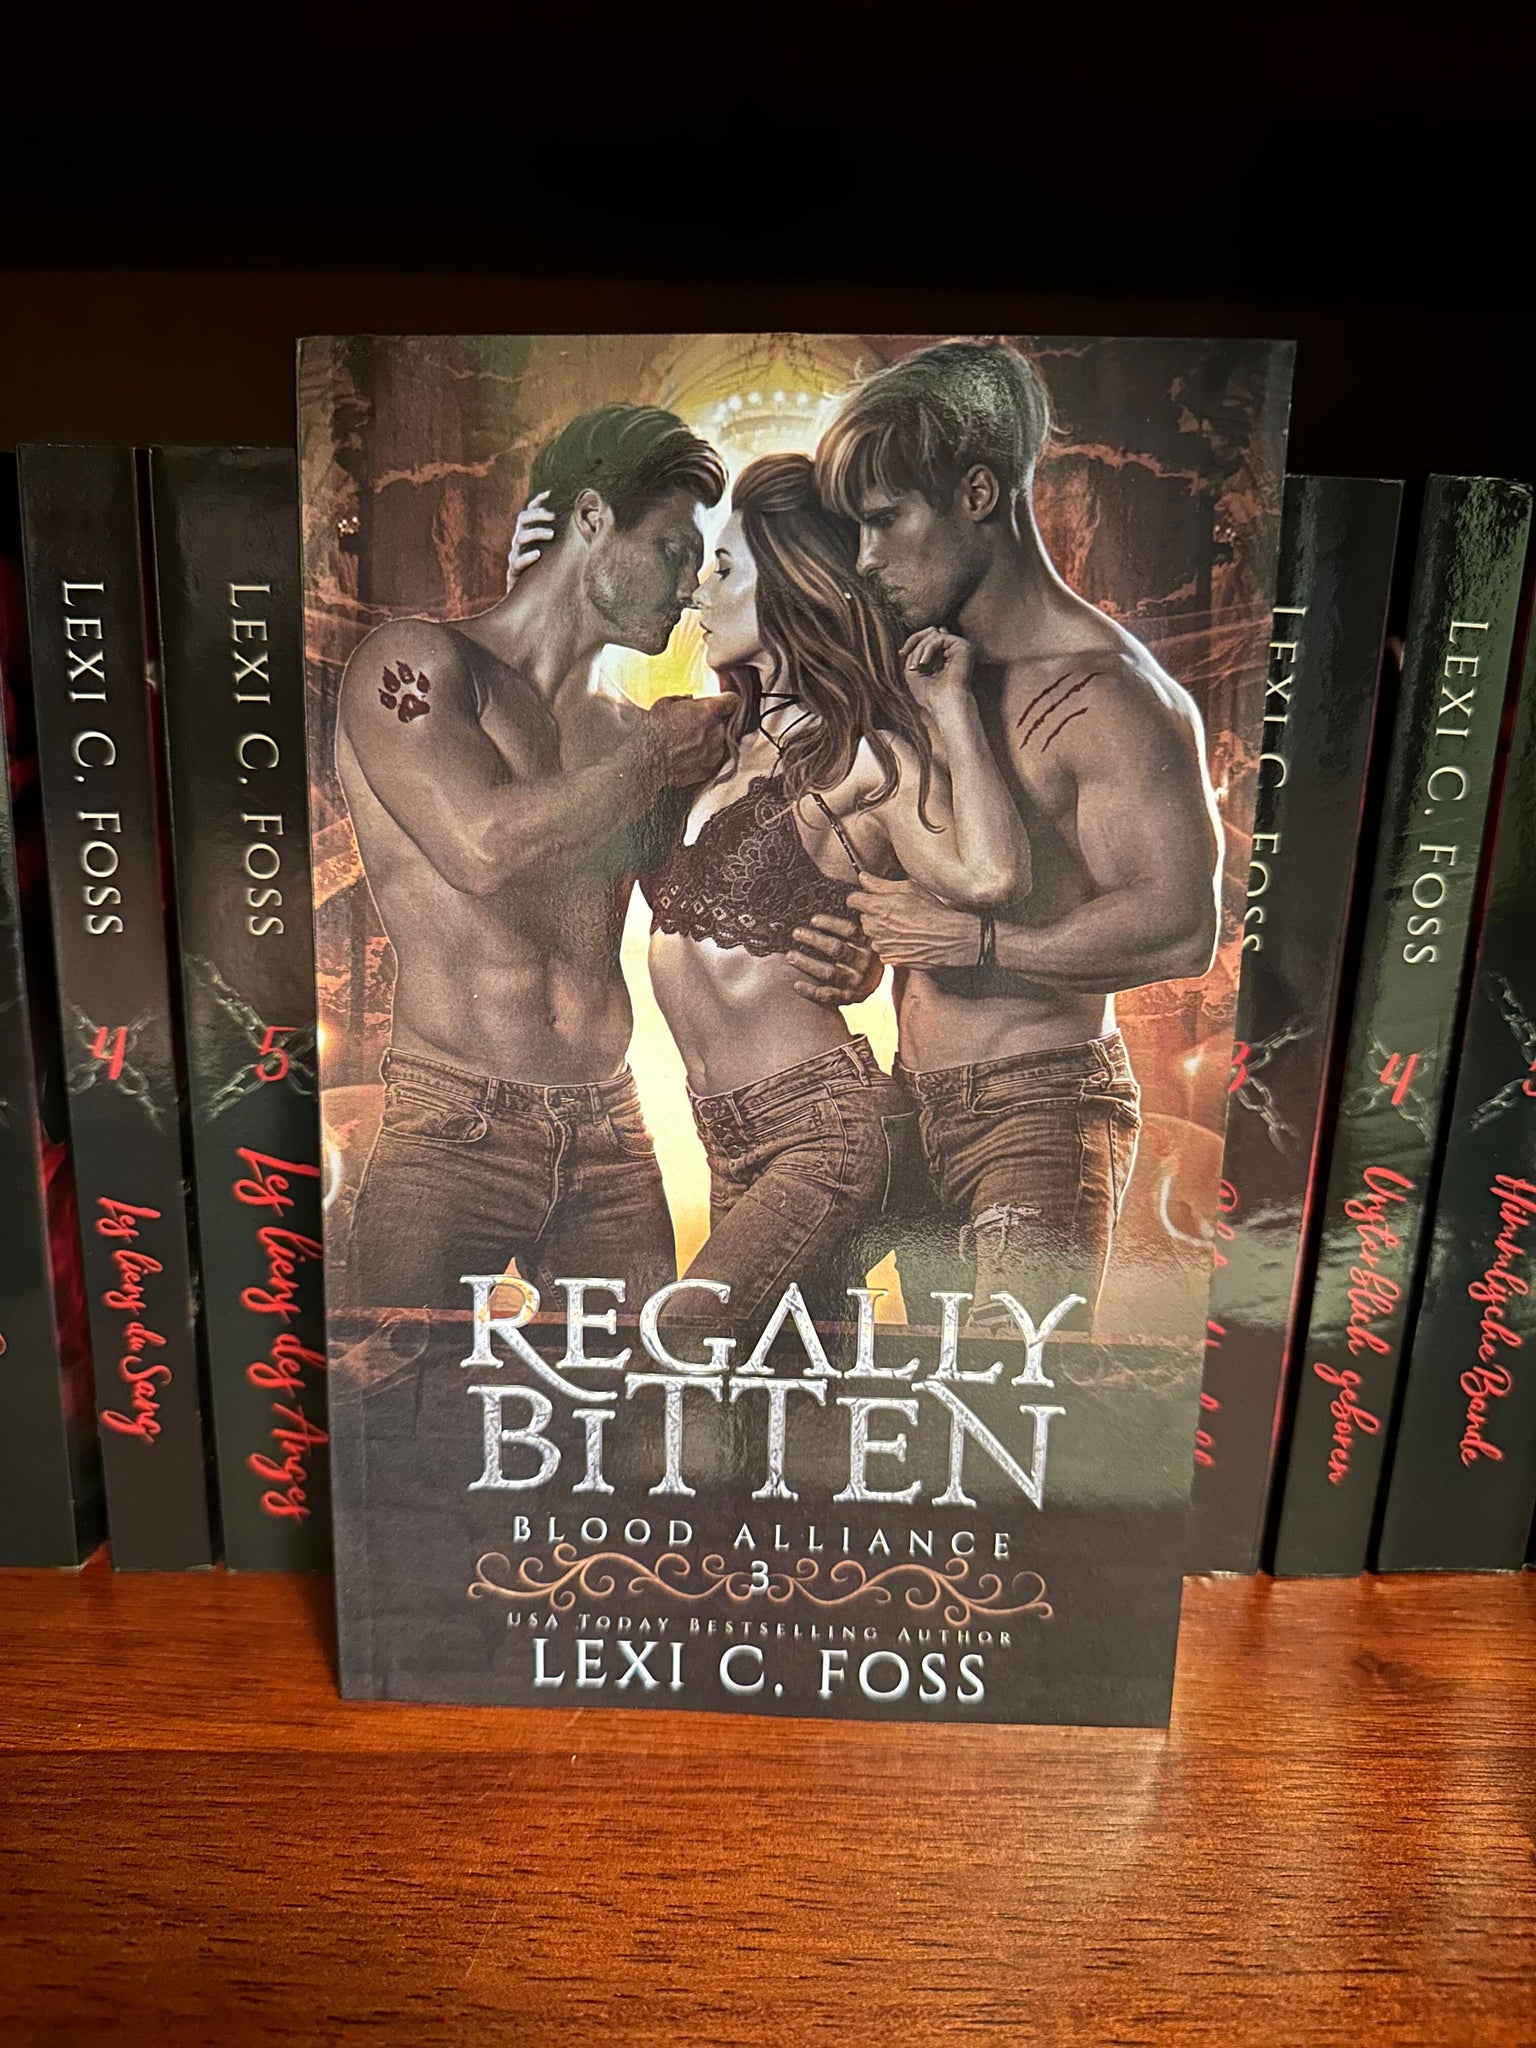 Regally Bitten- Special Edition Paperback (Blood Alliance: Book 3)